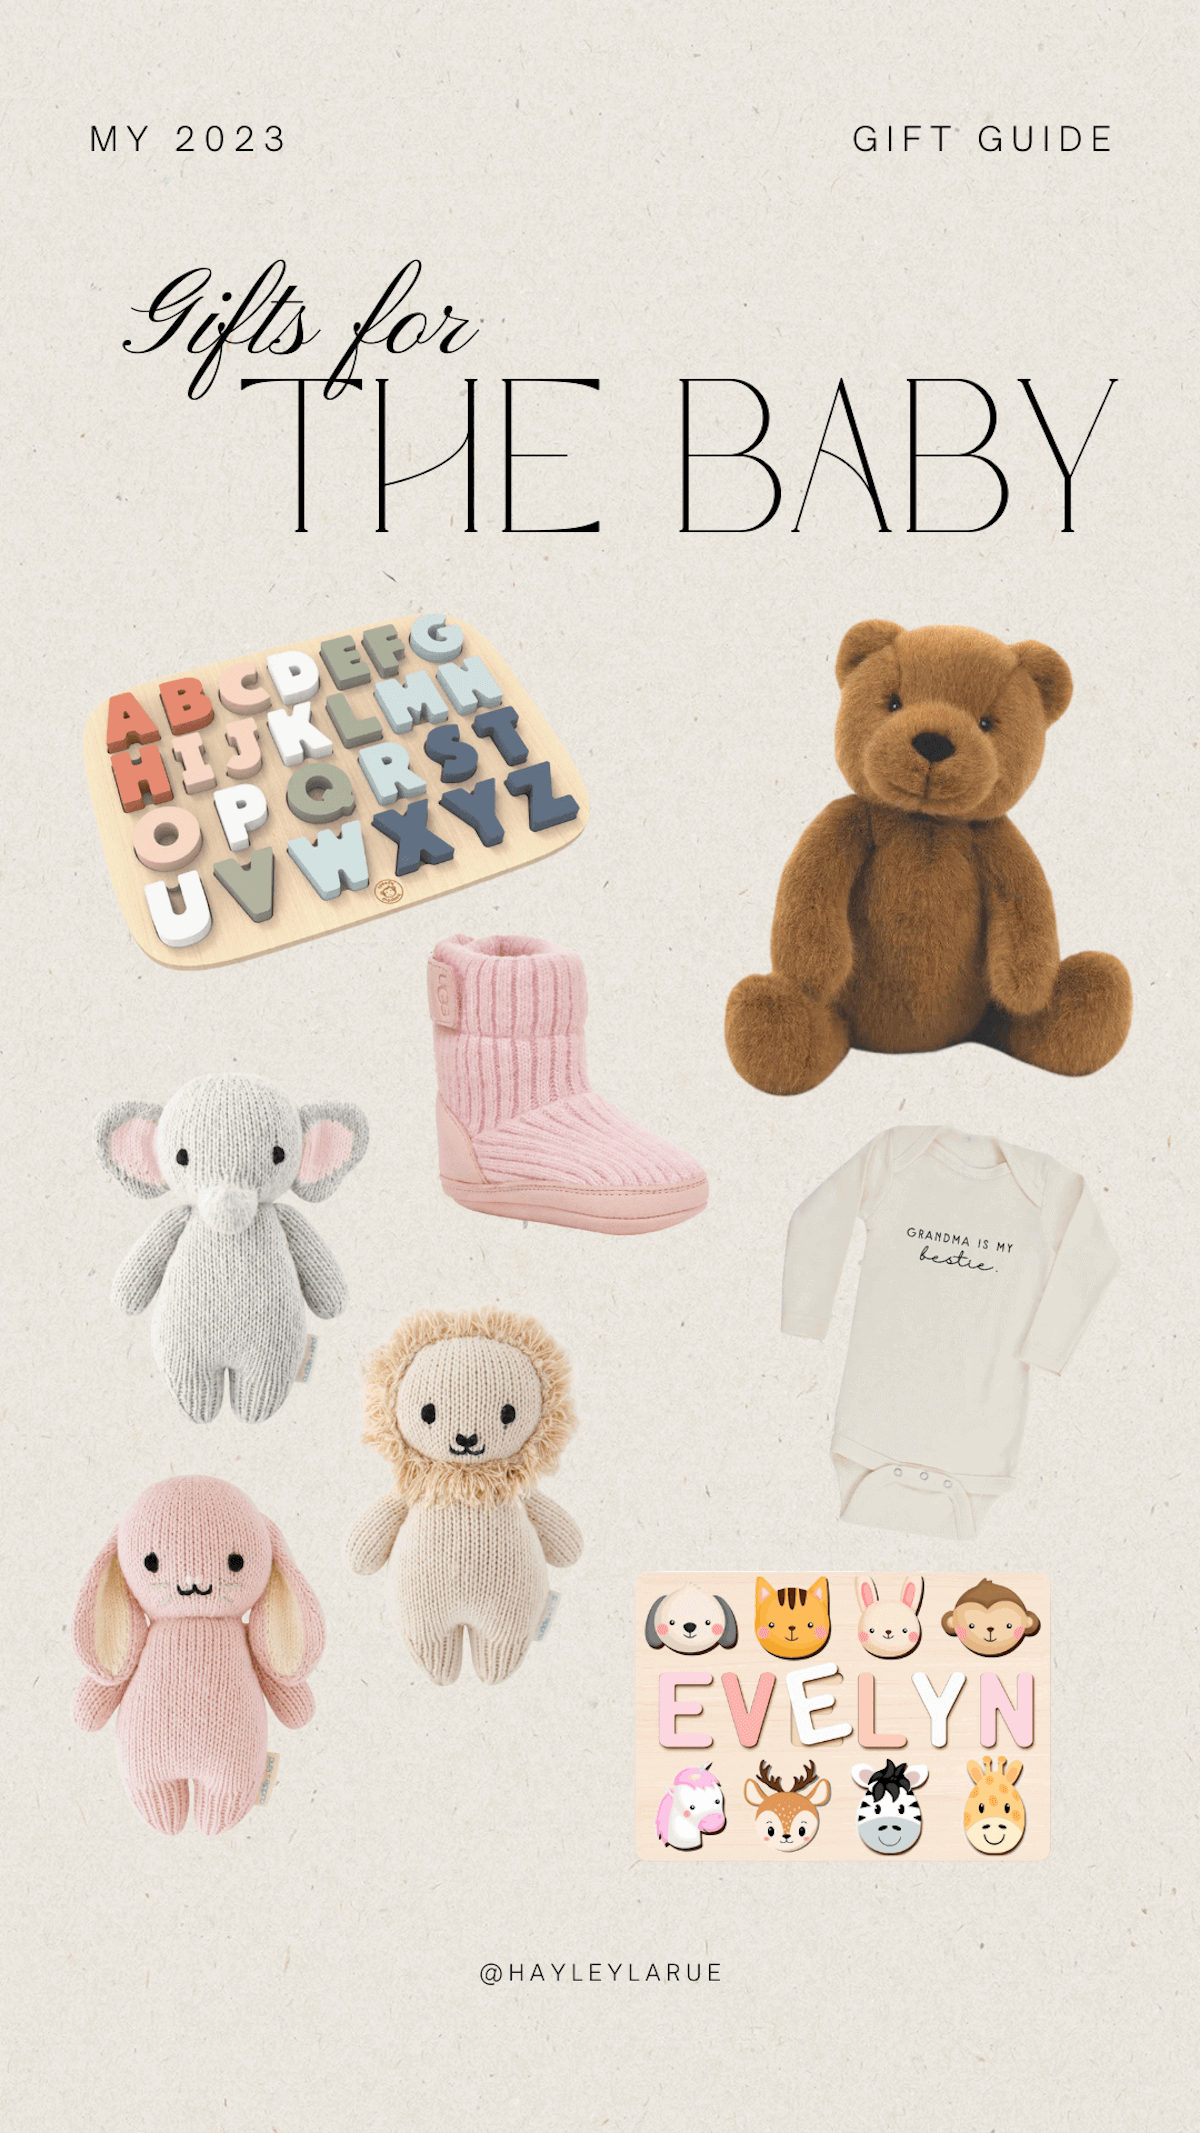 Gift Guide for The Baby